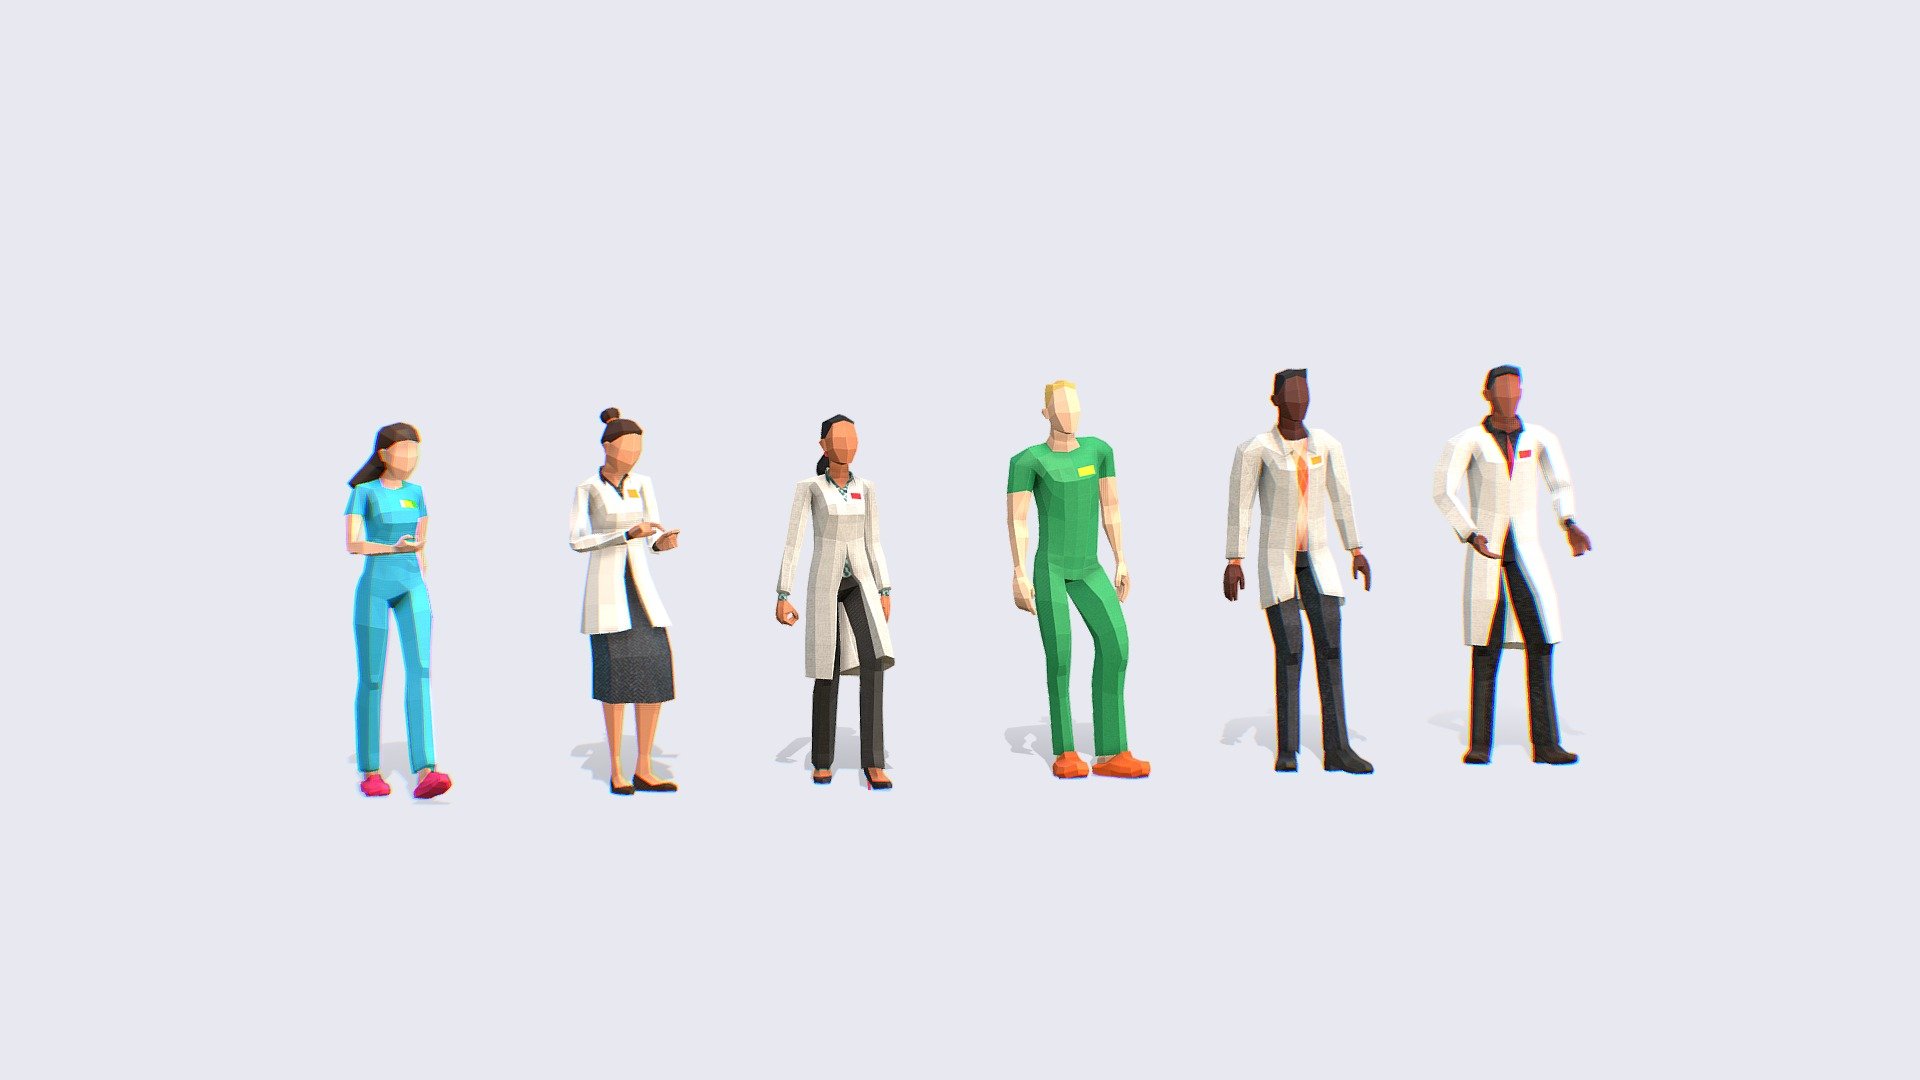 SCIENTIST LOWPOLY PEOPLE
Our animated and rigged low poly people packs come in a variety of styles and themes, from realistic and sci-fi to fantasy, and are expertly crafted to provide seamless integration into your workflow. Our experienced team animators and riggers have painstakingly created each character to ensure they move and behave with a lifelike quality that will captivate your audience.

Includes:




Independent Rest Pose in files: FBX, OBJ, GLB -for easy rigging

Independent Animated -FBX, BLEND (Native) -file includes all 6 animations

Textures created for the pack.

PROPS AND EXTRA MODELS INCLUDED AS SEEN ON 3D MODEL
Make your crowds stand out from your competition with our collection of low poly people with amazing possibilities.





This pack is the first that we upload with our 3RD GENERATION of Animated Low-Poly People and it will be included in The Compilation
 - Scientist People - Animated & Rigged - Buy Royalty Free 3D model by Studio Ochi (@studioochi) 3d model